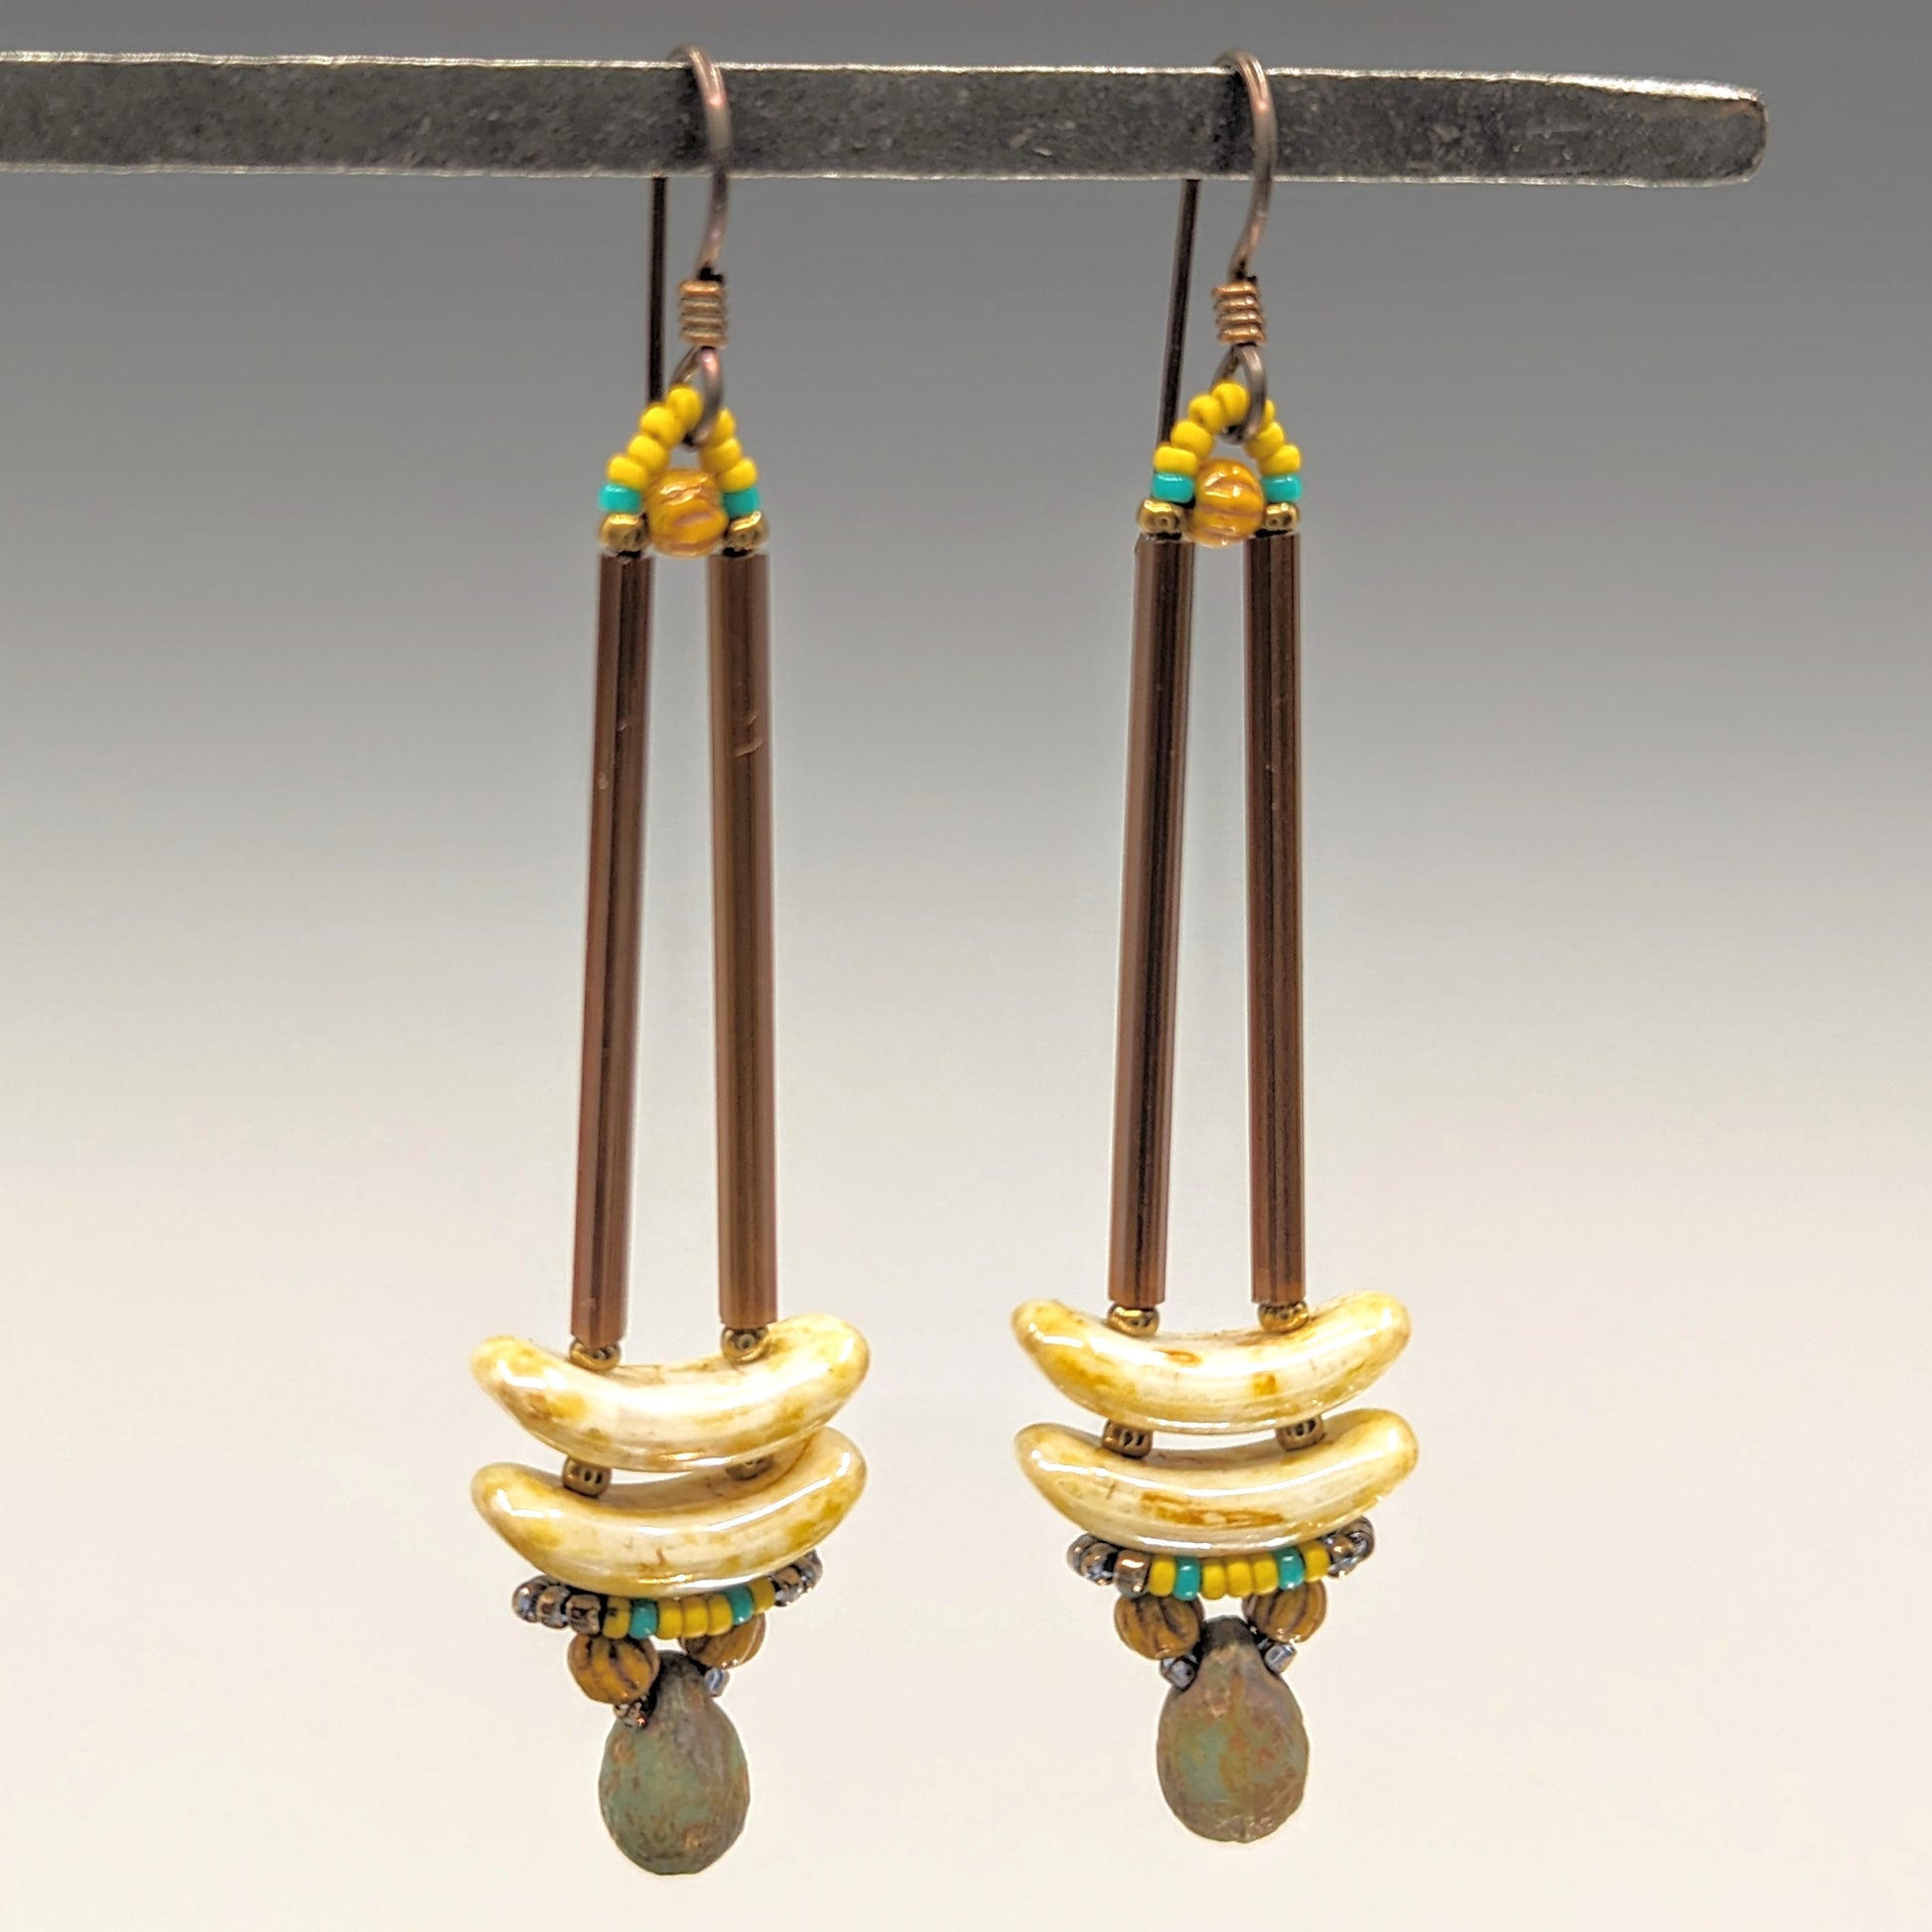 Earrings that look similar to a medicine dropper hang from  a black bar. There are two long, brown beads forming narrow vertical columns ending at the top of two speckled cream stacked arc shaped beads. At the bottom is a rough brown and turquoise drop , surrounded by a belt of mustard and turquoise seed beads.